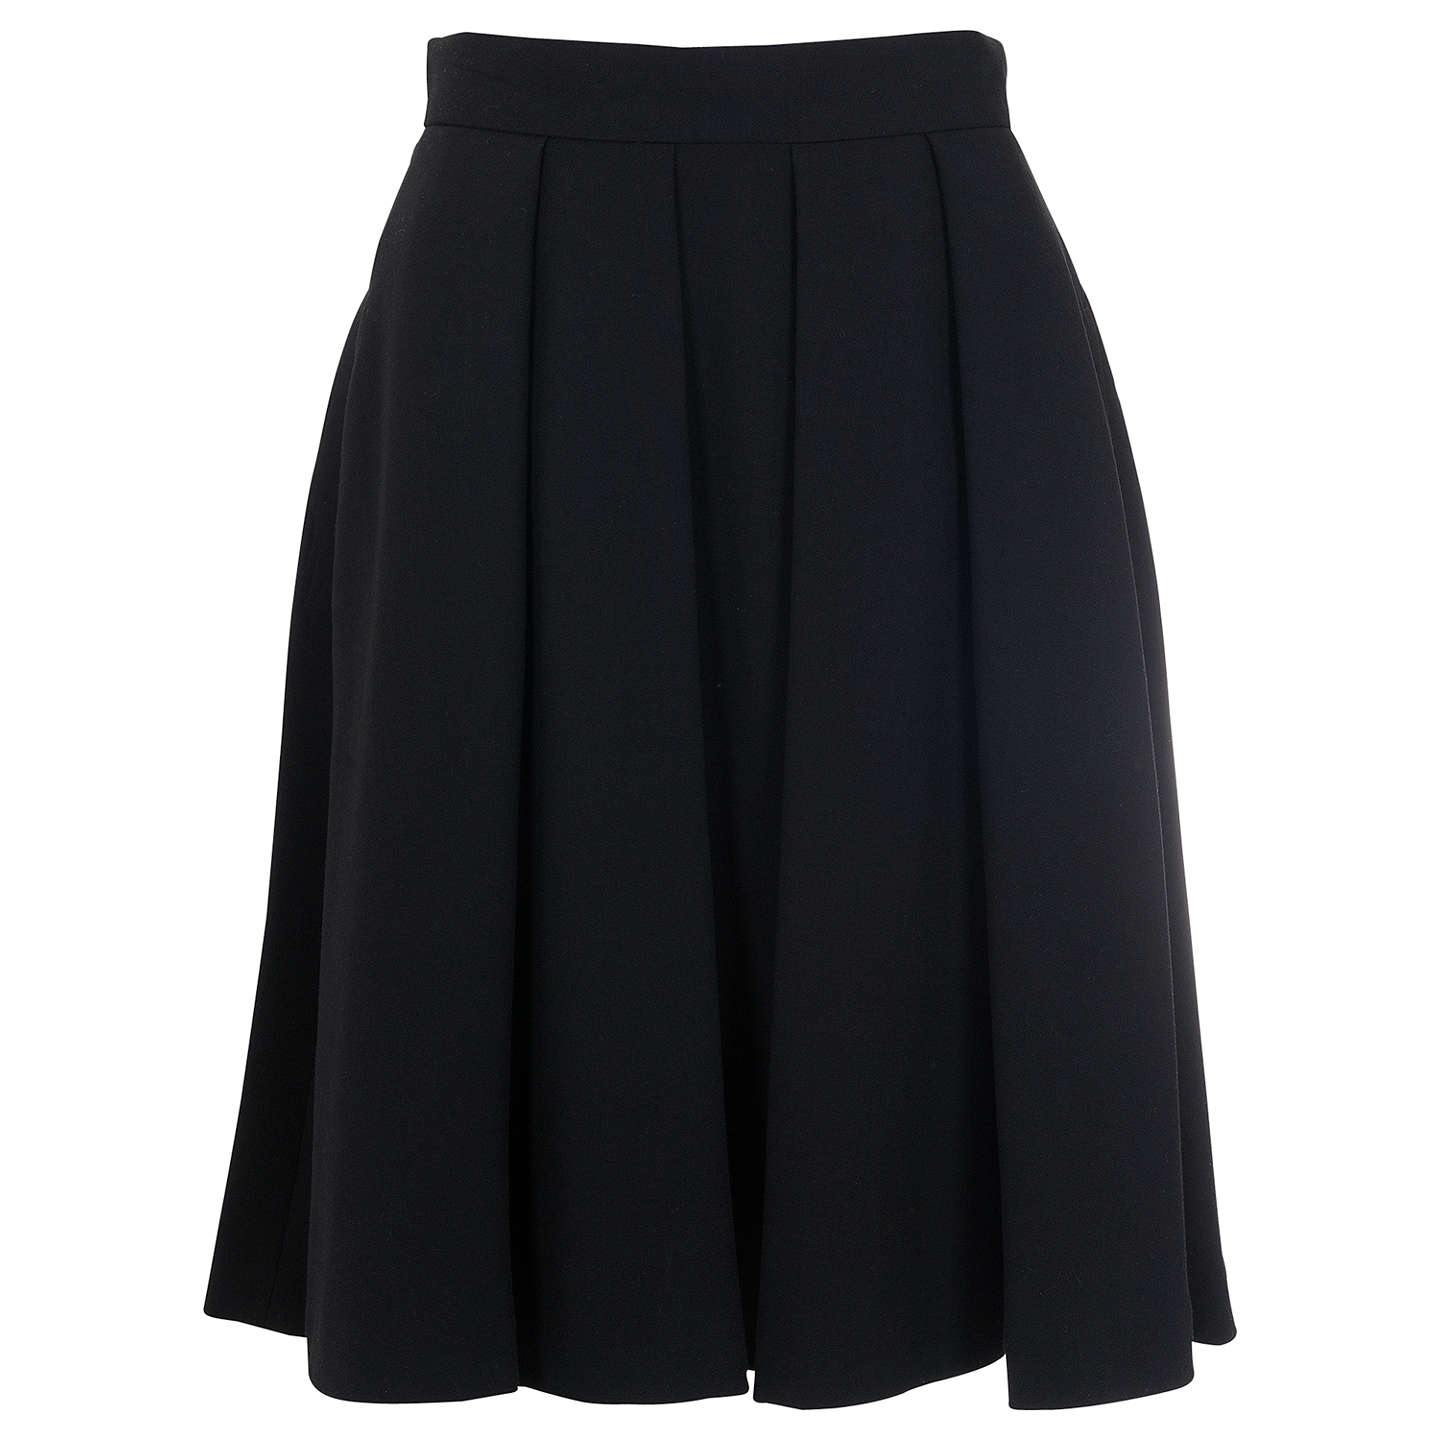 French Connection Whisper Ruth Flared Skirt, Black at John Lewis